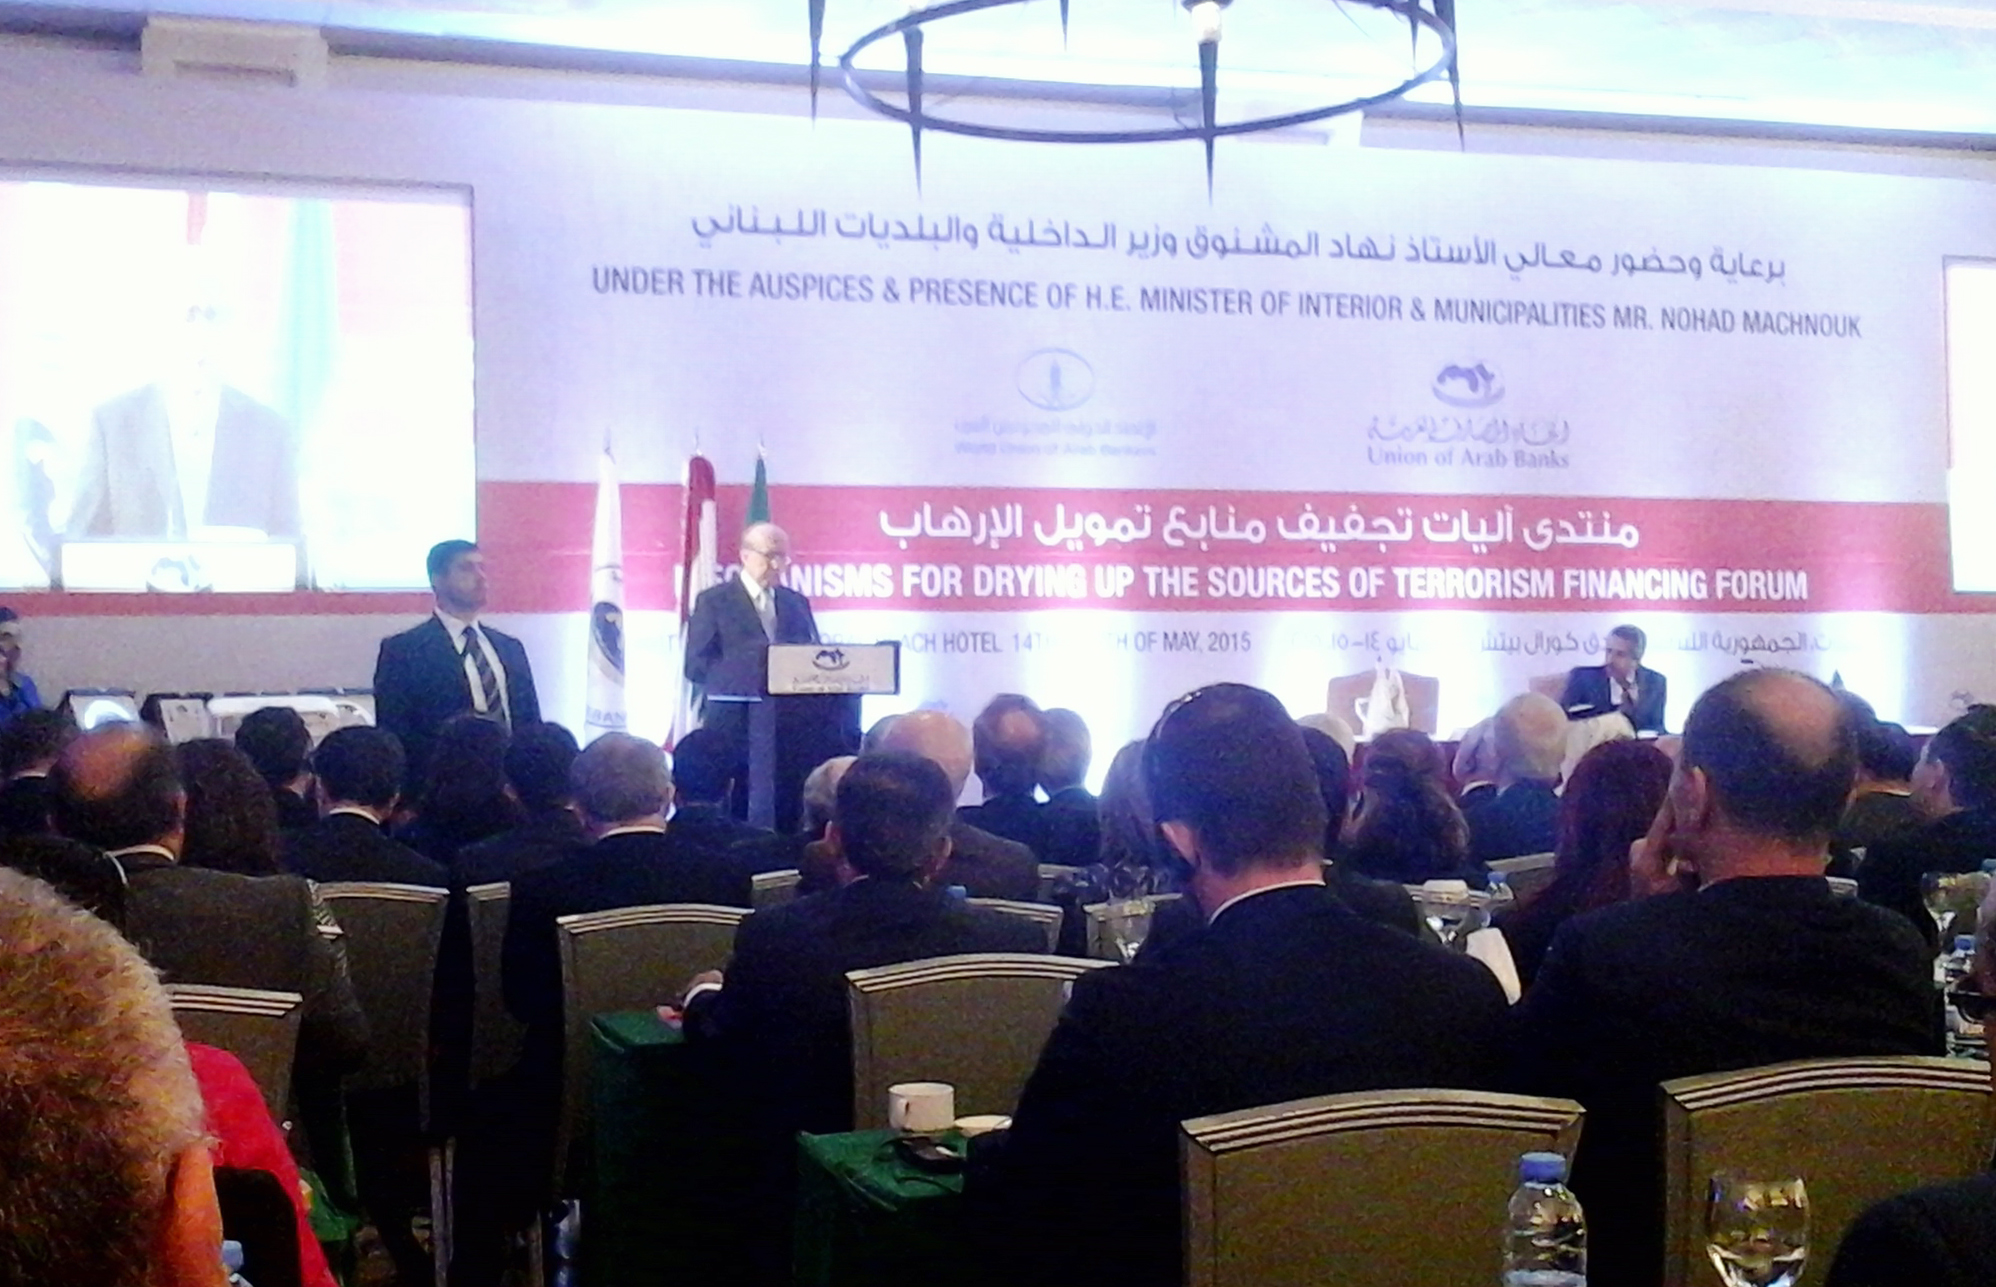 Joseph Torbey, President of the World Union of Arab Bankers (WUAB)